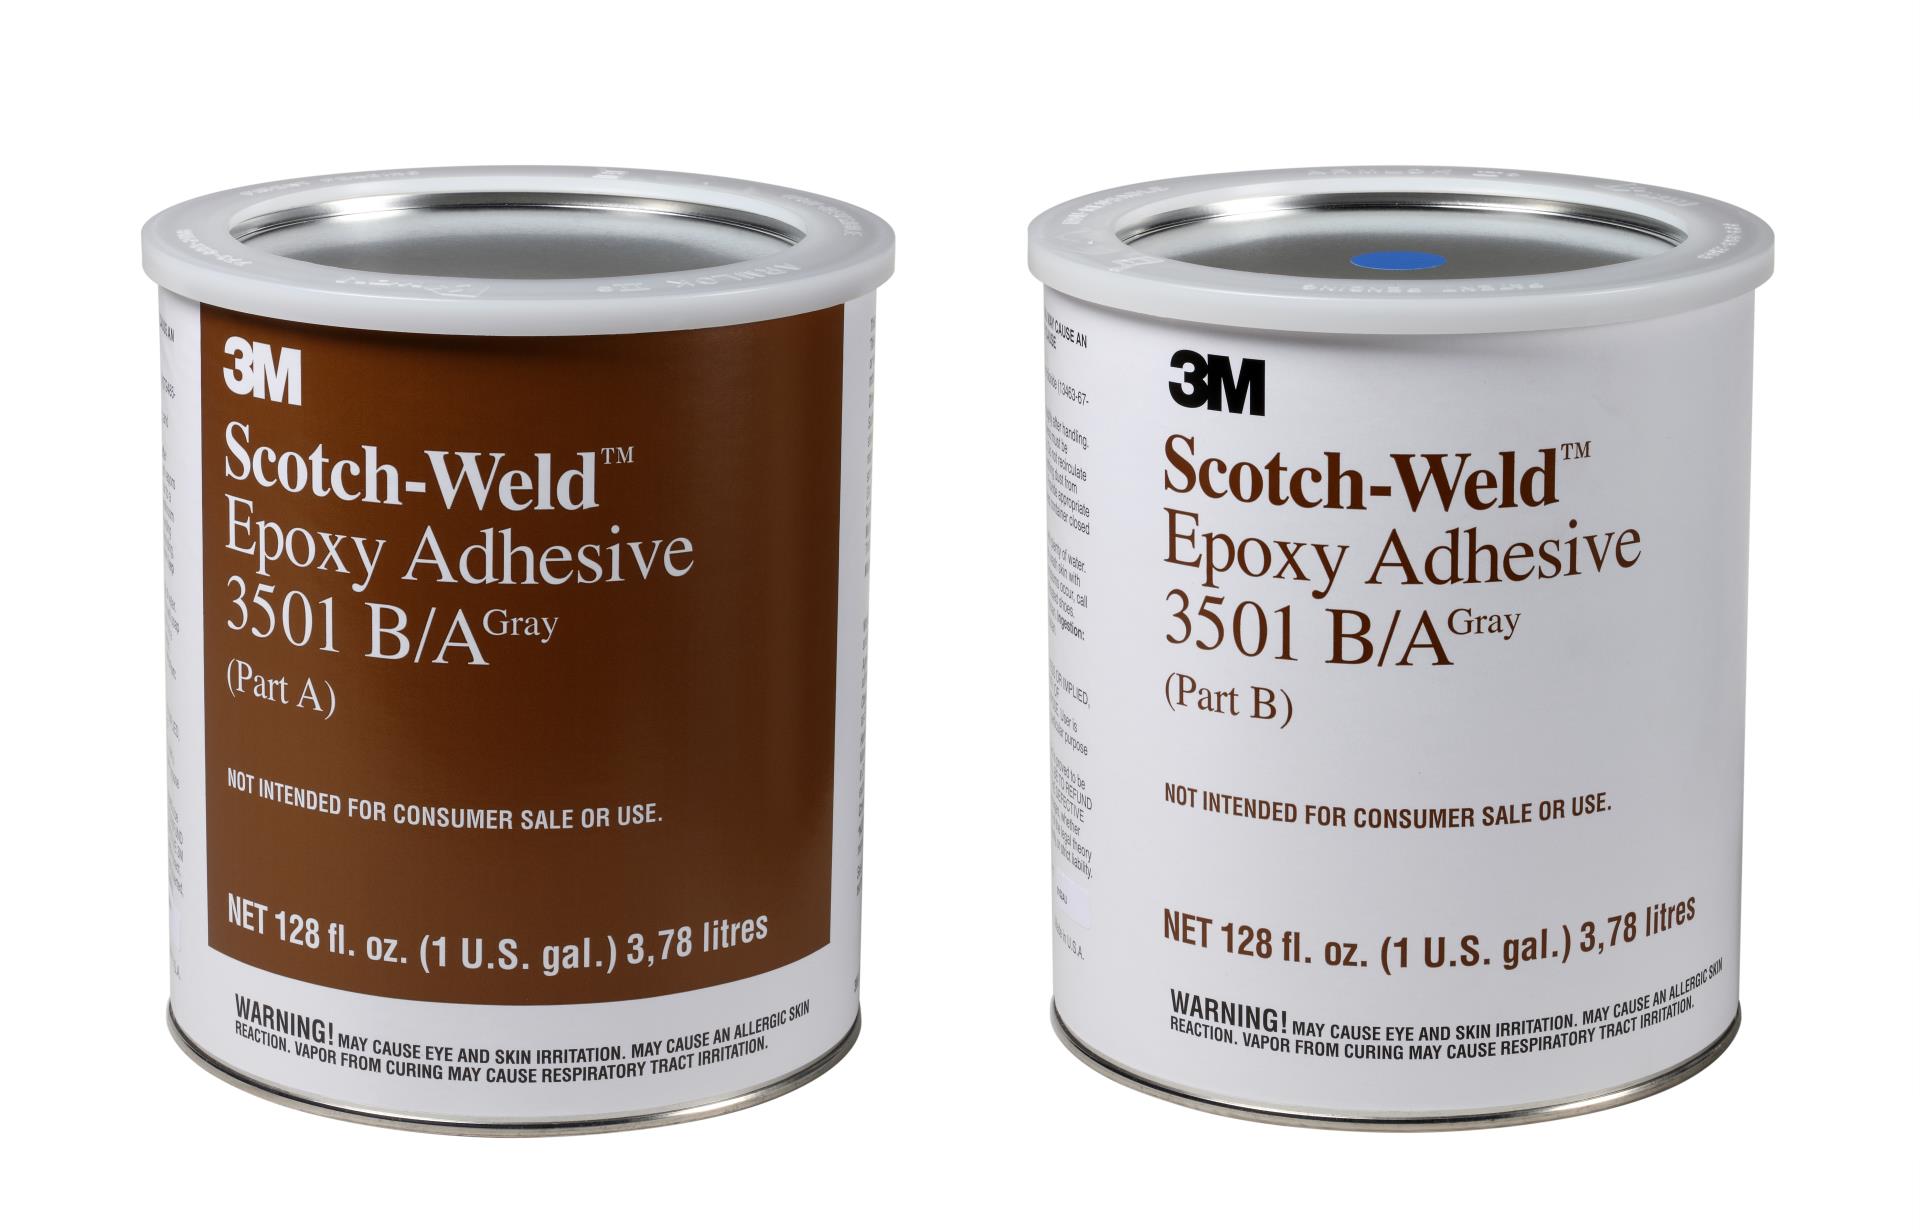 https://www.e-aircraftsupply.com/ItemImages/61/7010367461_3M_Scotch-Weld_Epoxy_Adhesive_3501_Gray_Part_BA.jpg